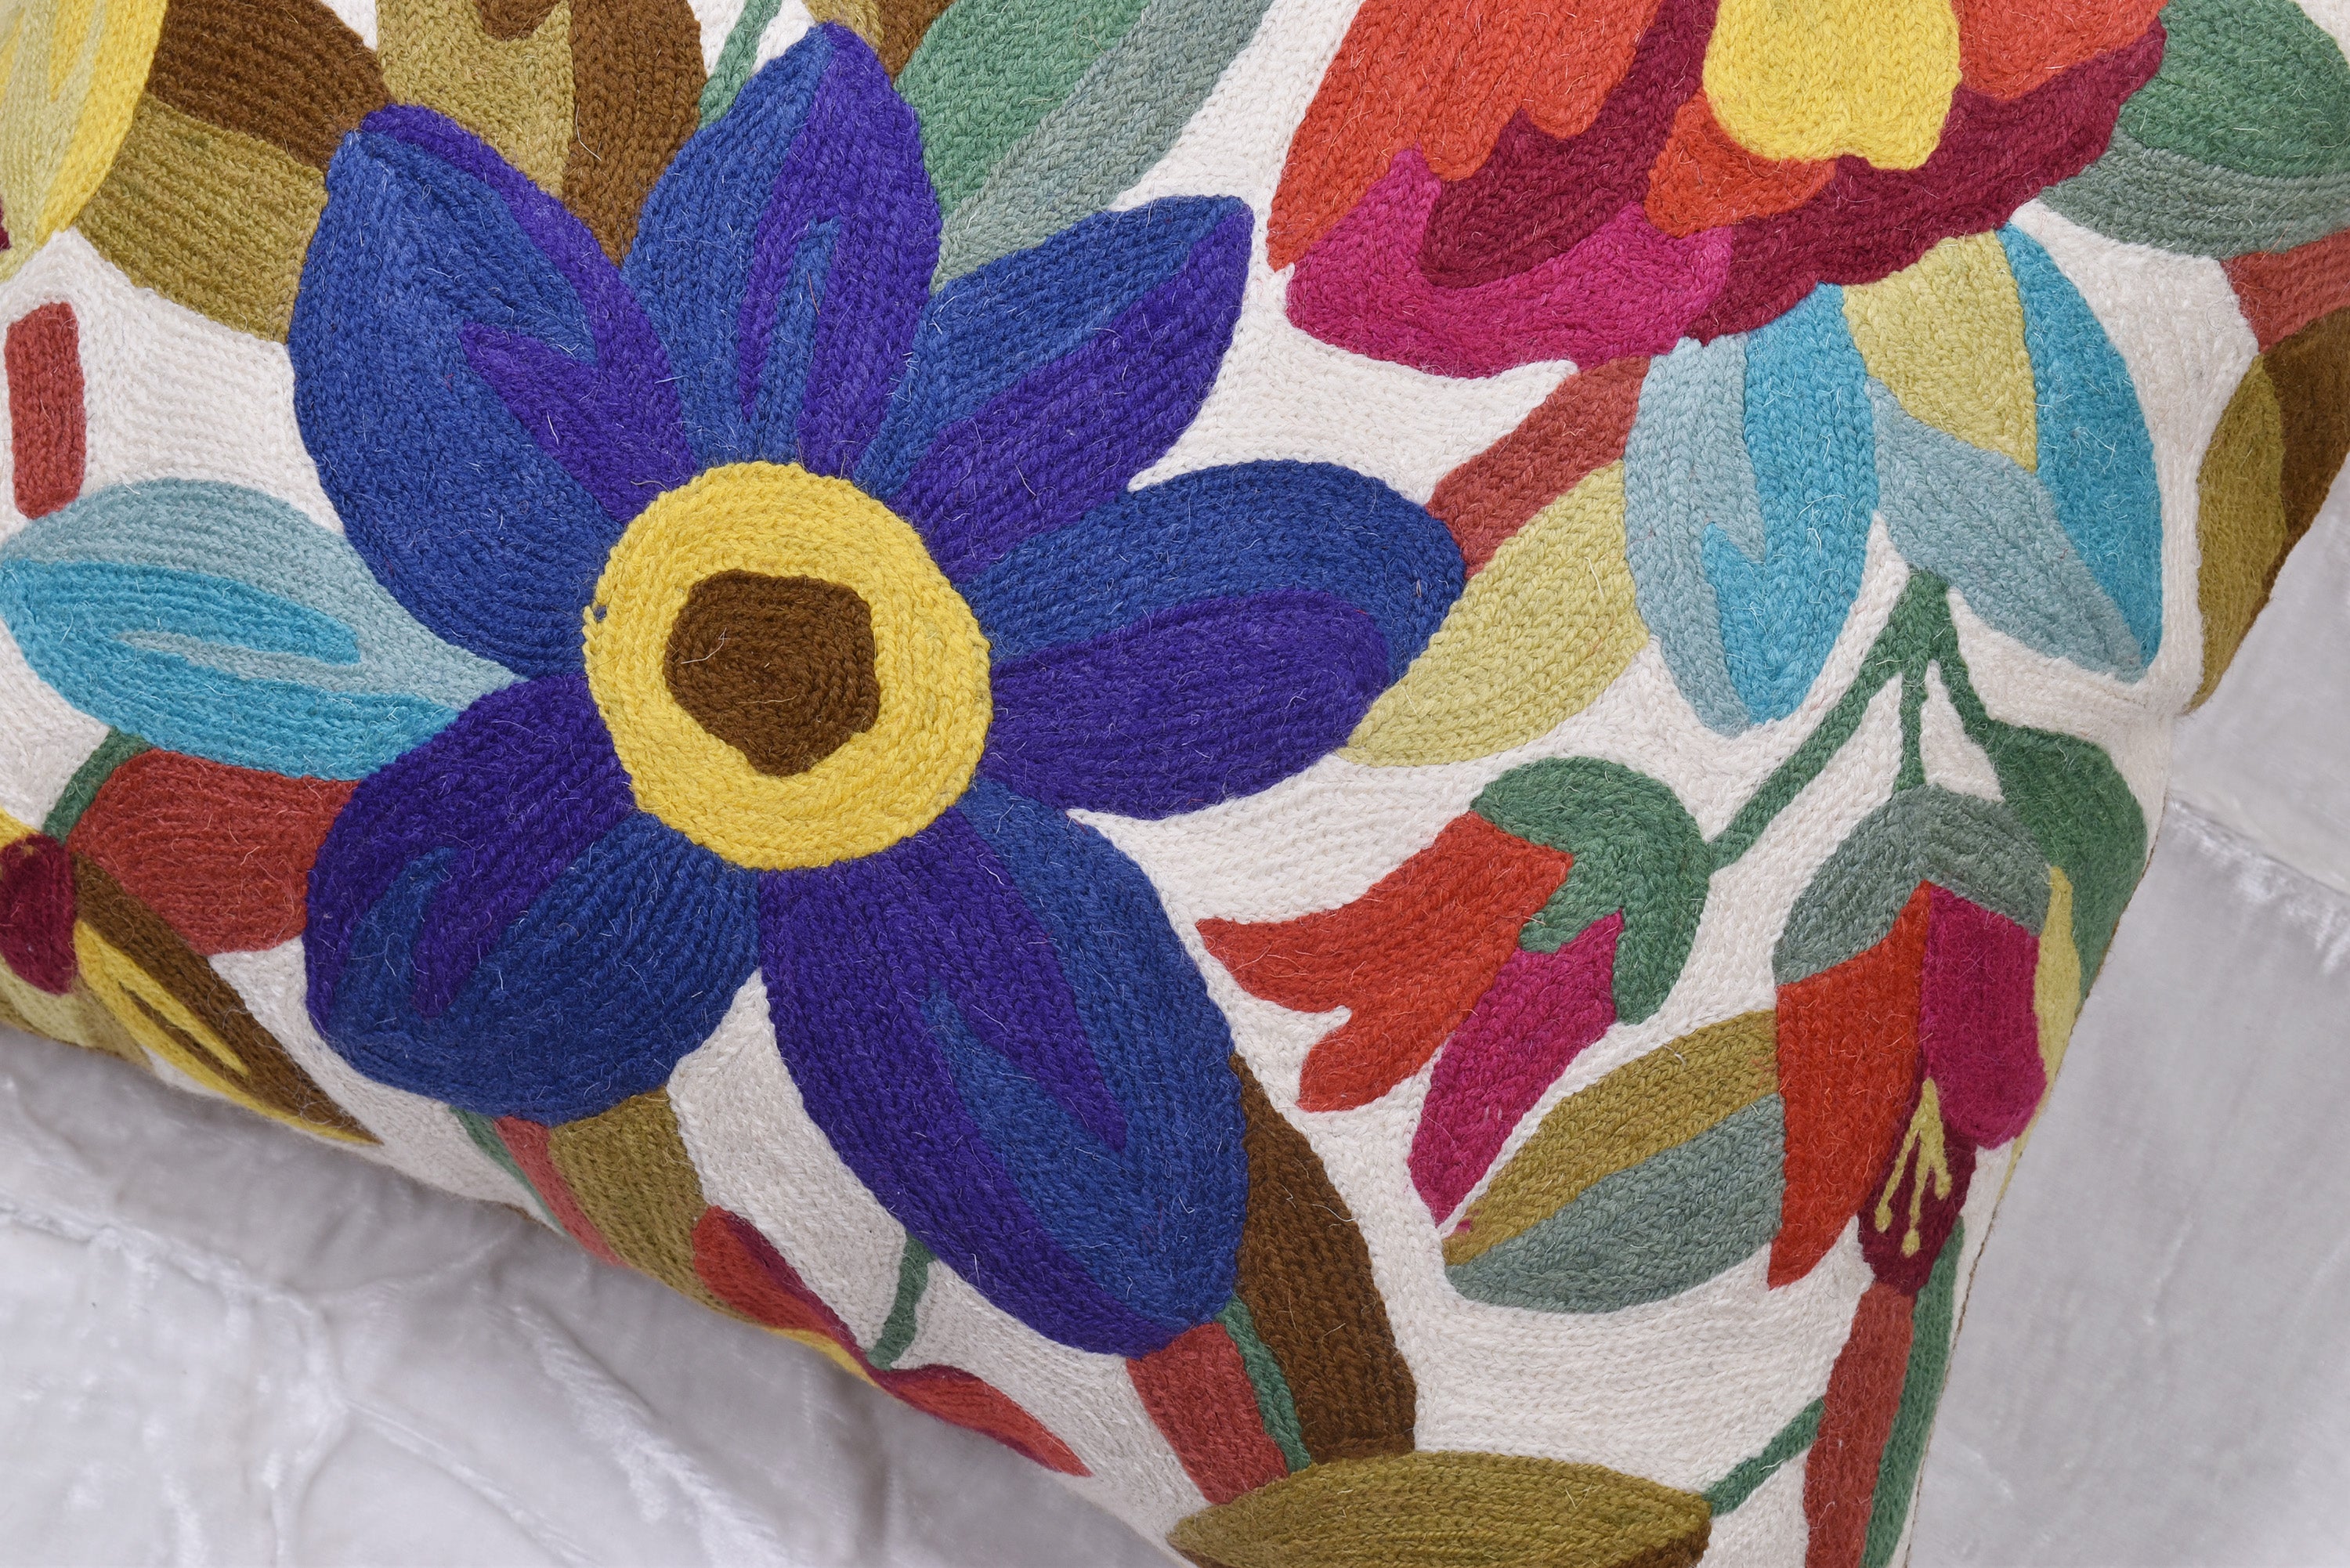 Hillview Embroidered Outdoor Pillow Covers Flower India